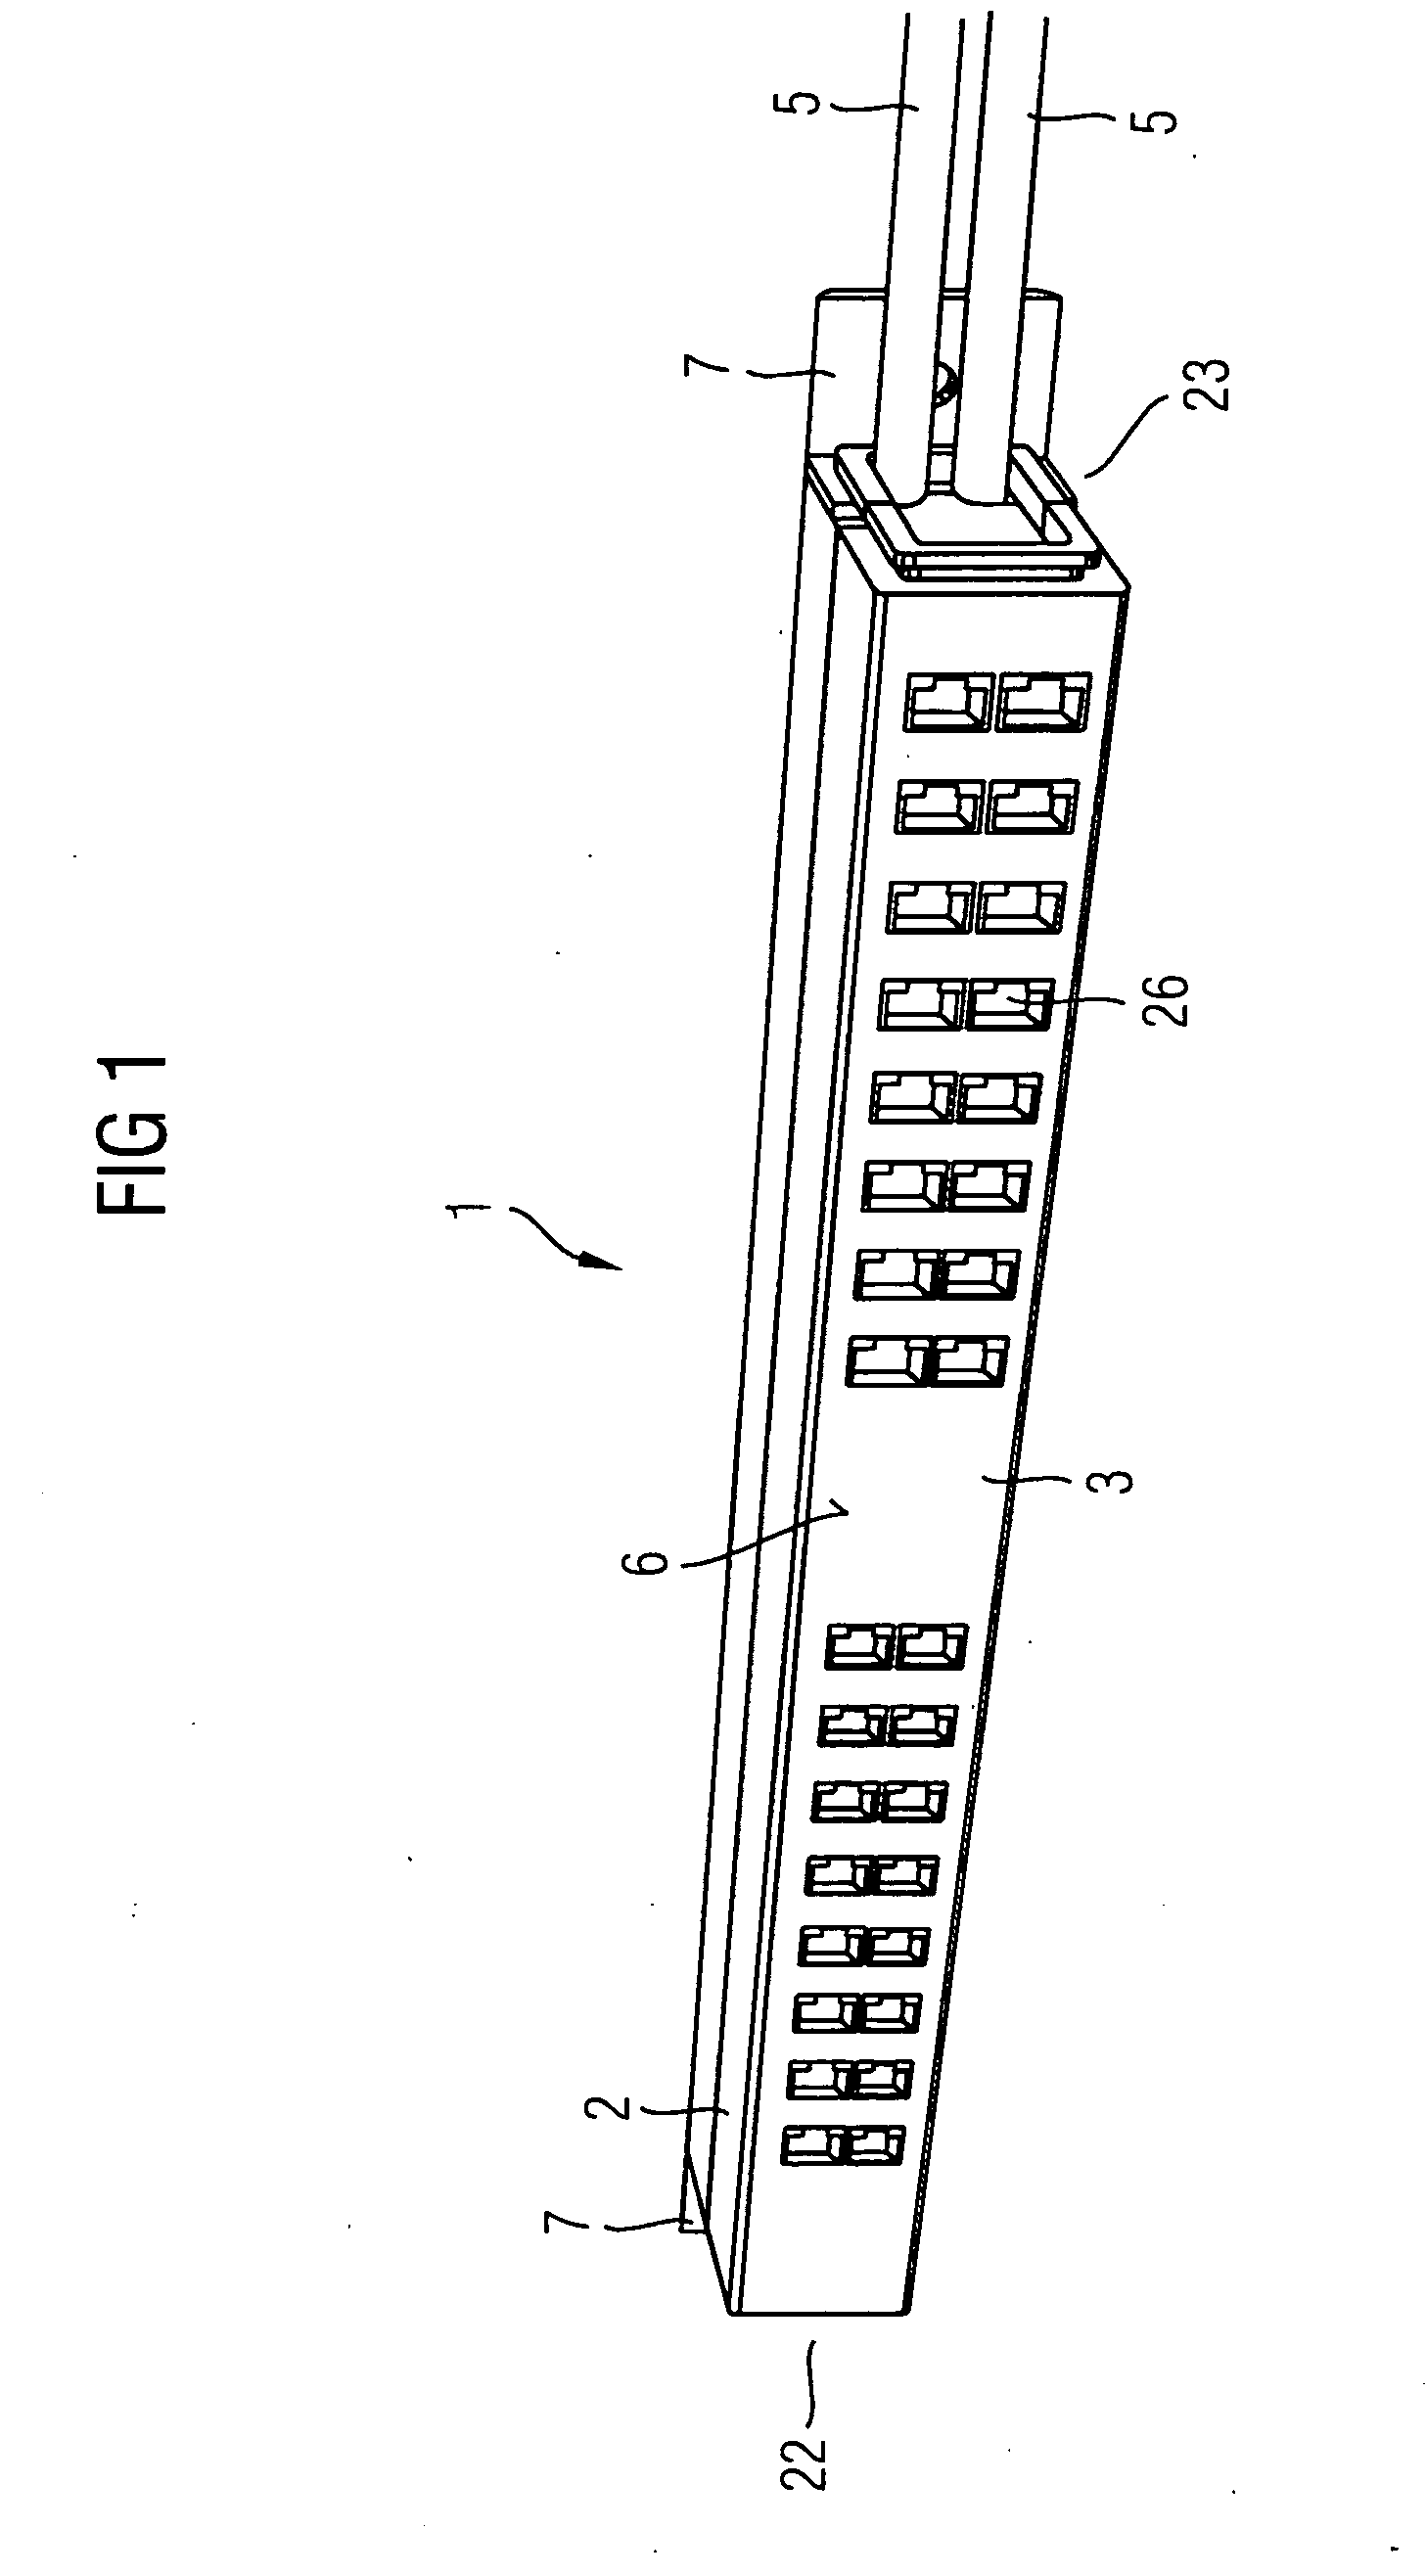 Patch panel for mounting on a wall or in a subrack